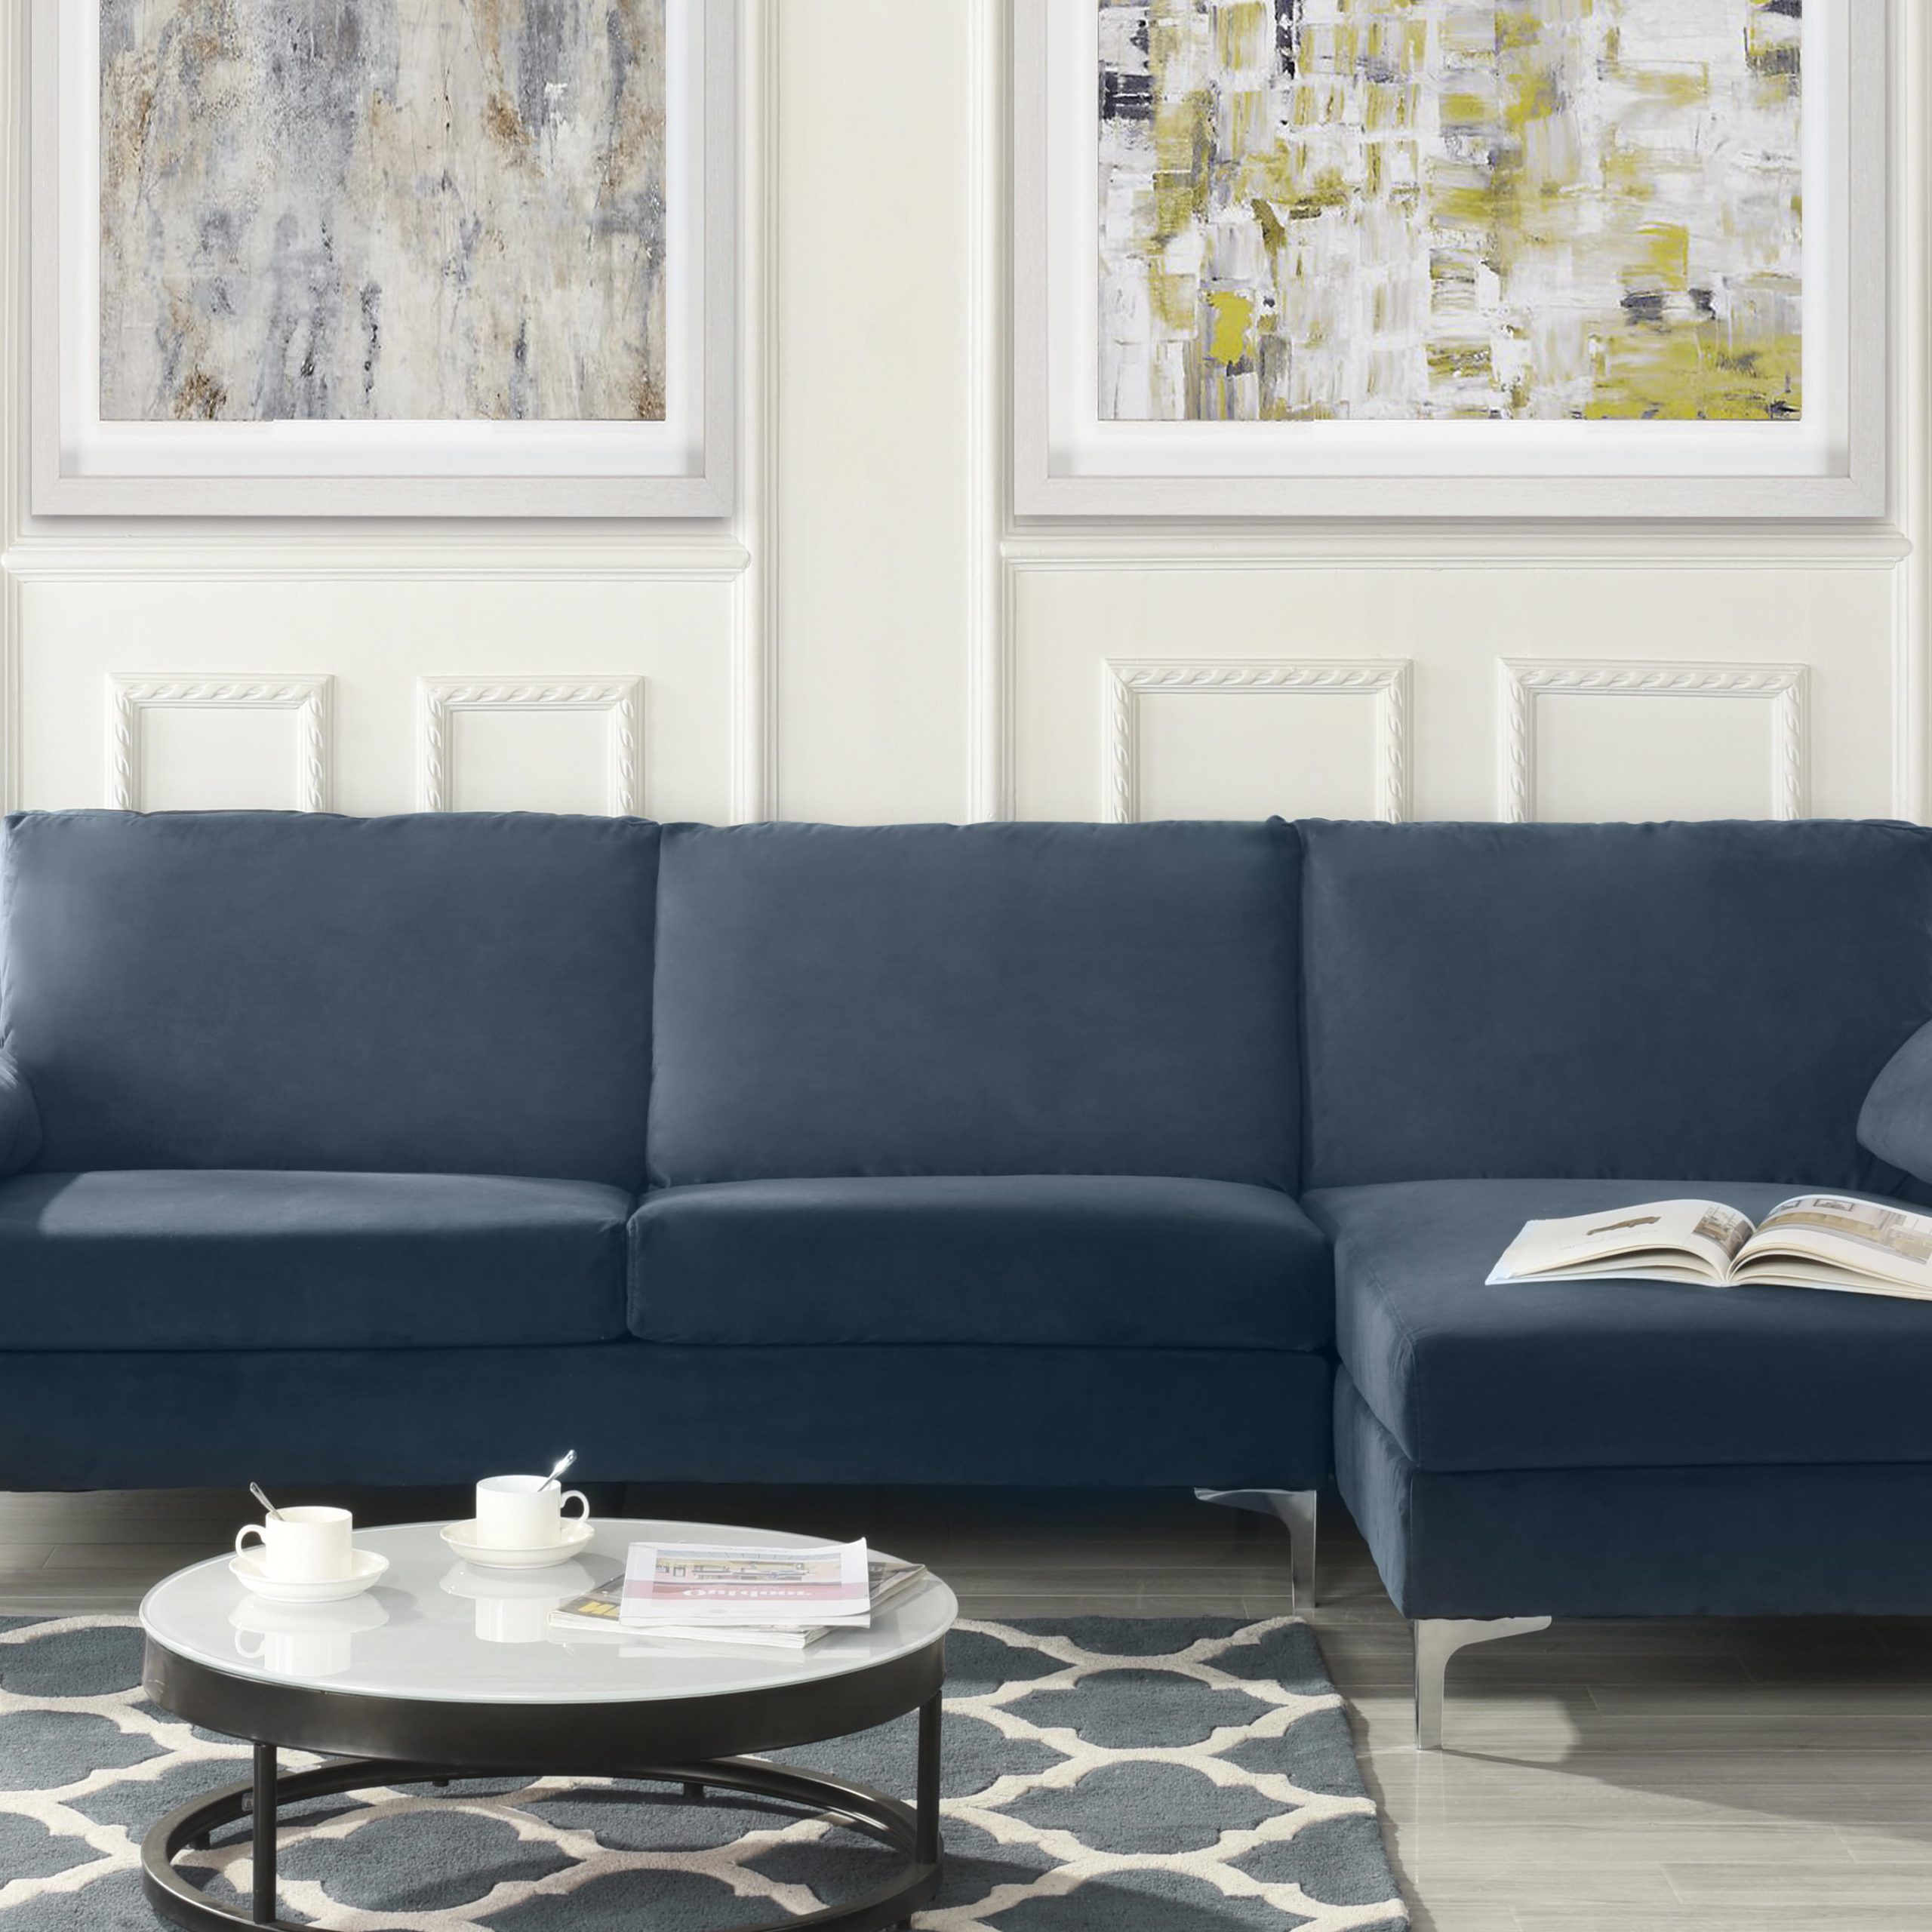 Modern Velvet Fabric Sectional Sofa, Large L Shape Couch With Wide Within Modern Velvet Sofa Recliners With Storage (View 6 of 20)